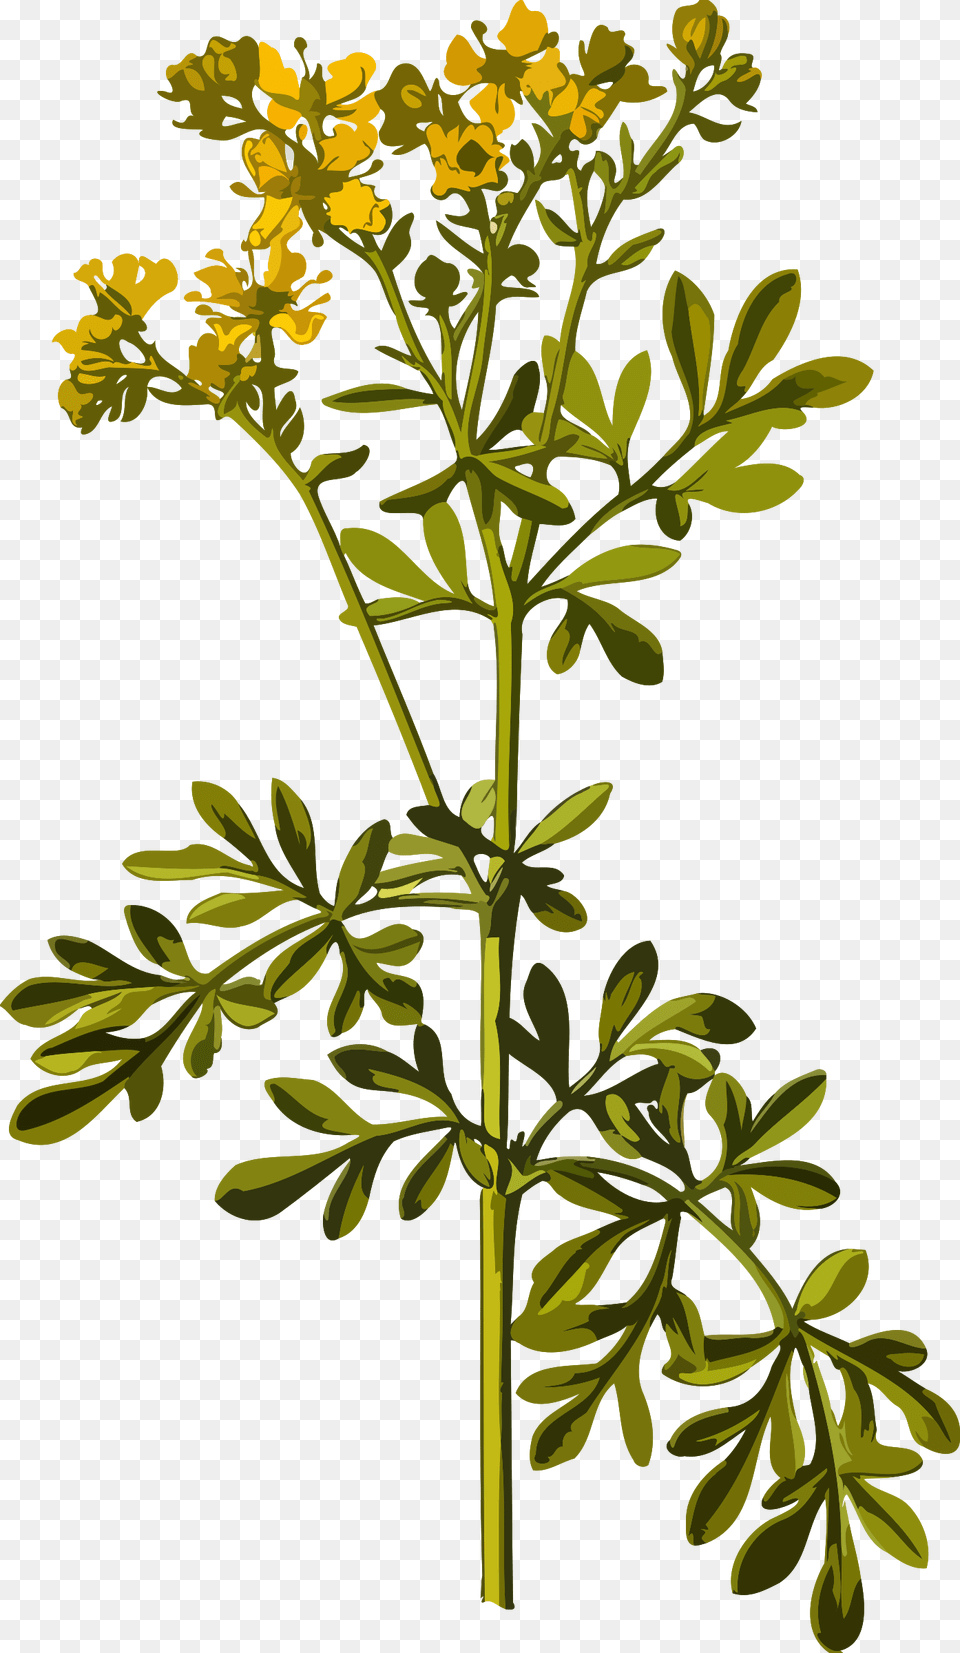 Common Rue By Firkin From A Drawing In 39medizinal Pflanzen39 Rue Herb, Flower, Plant, Apiaceae, Leaf Png